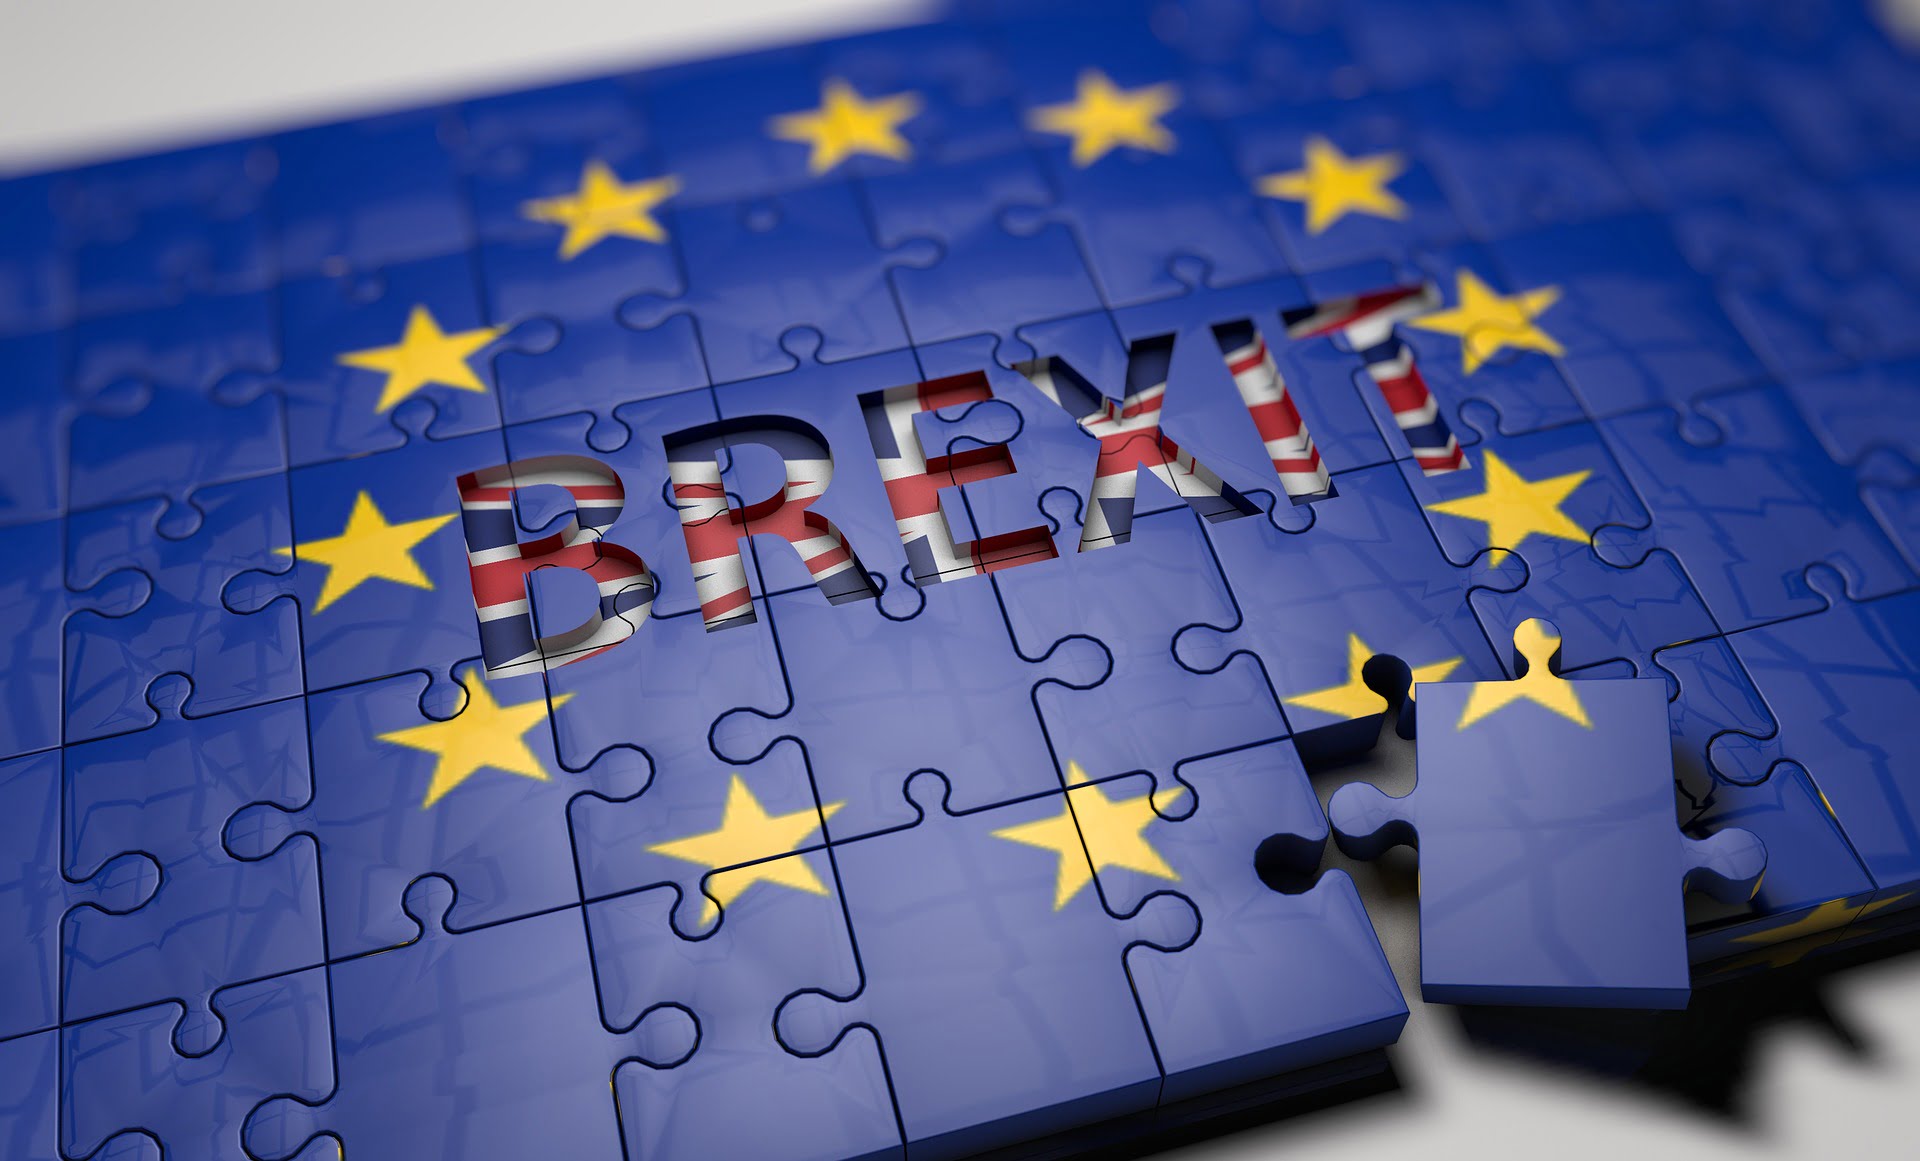 As Brexit Negotiations Ensue, How Will Ongoing Uncertainty Affect the Financial Markets?